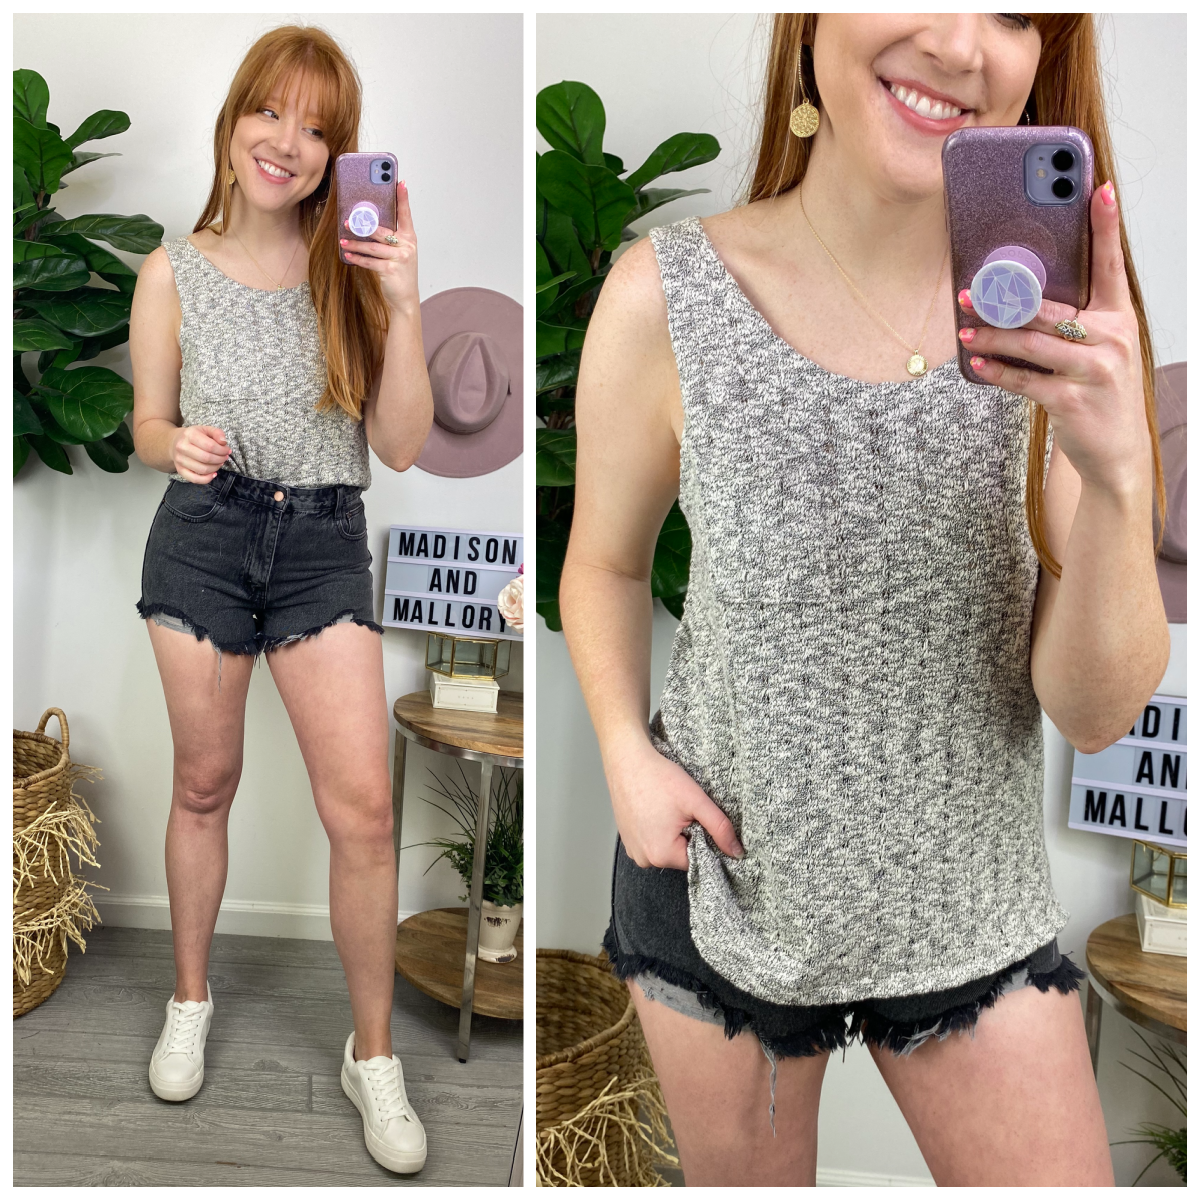  New Aesthetic Textured Pocket Tank Top - Madison and Mallory